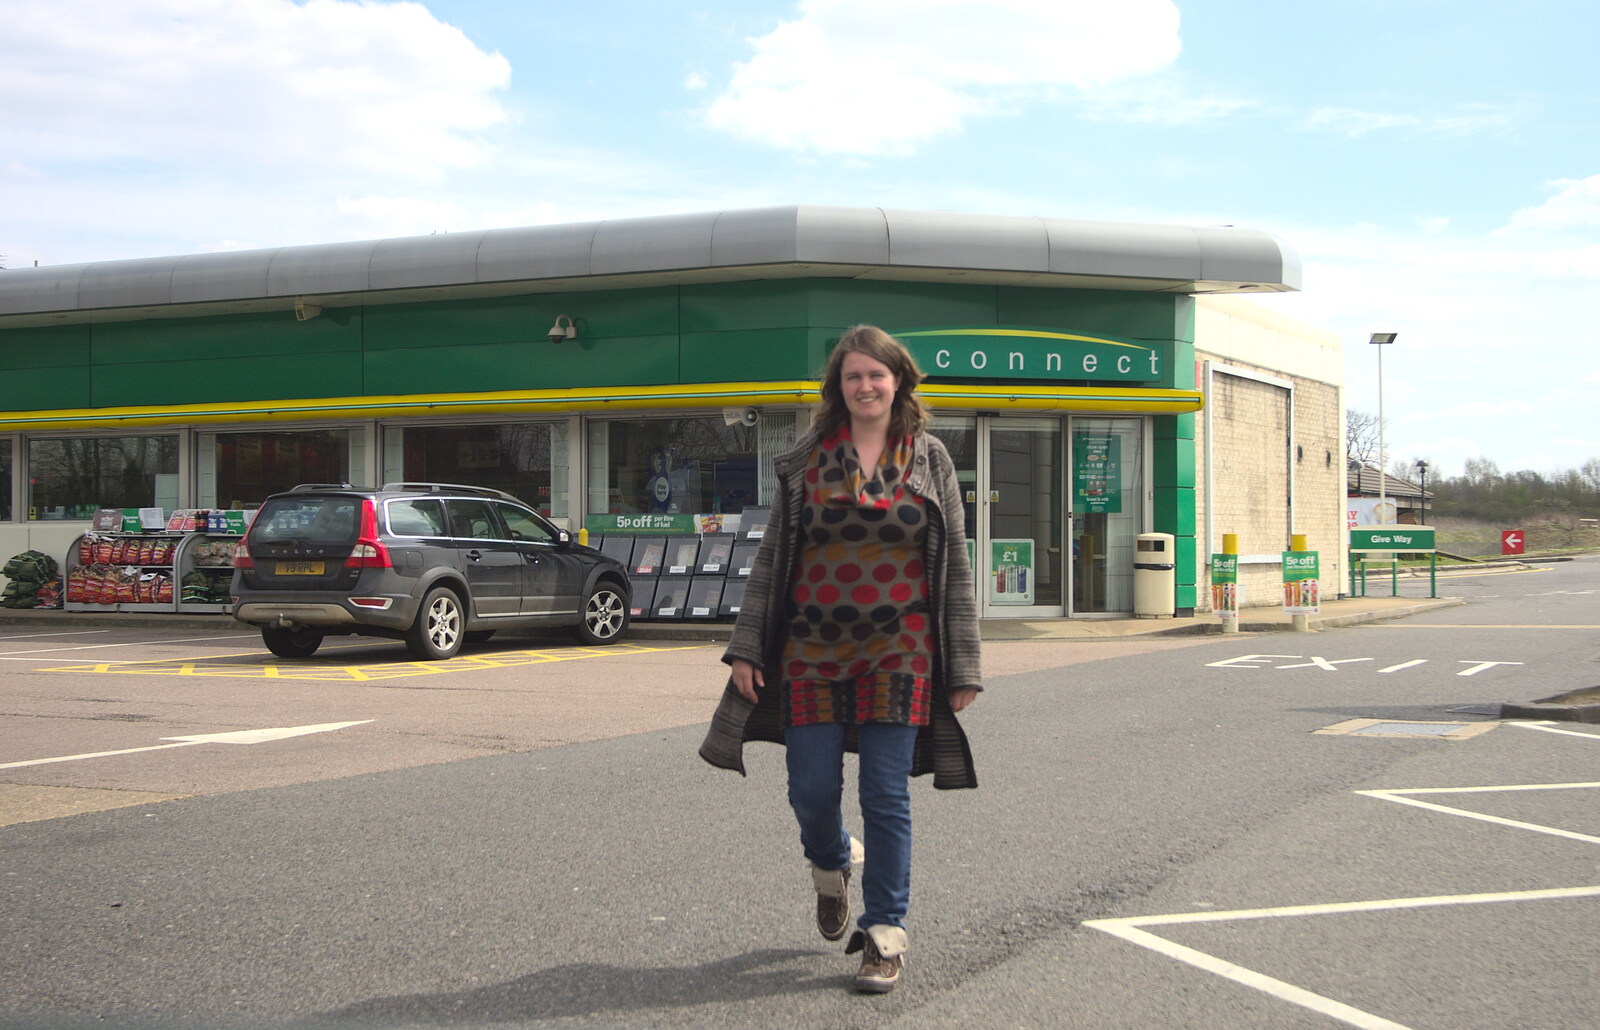 Isobel at the BP garage on the A14 near Huntingdon from Uncle James's Ninetieth Birthday, Cheadle Hulme, Manchester - 20th April 2013